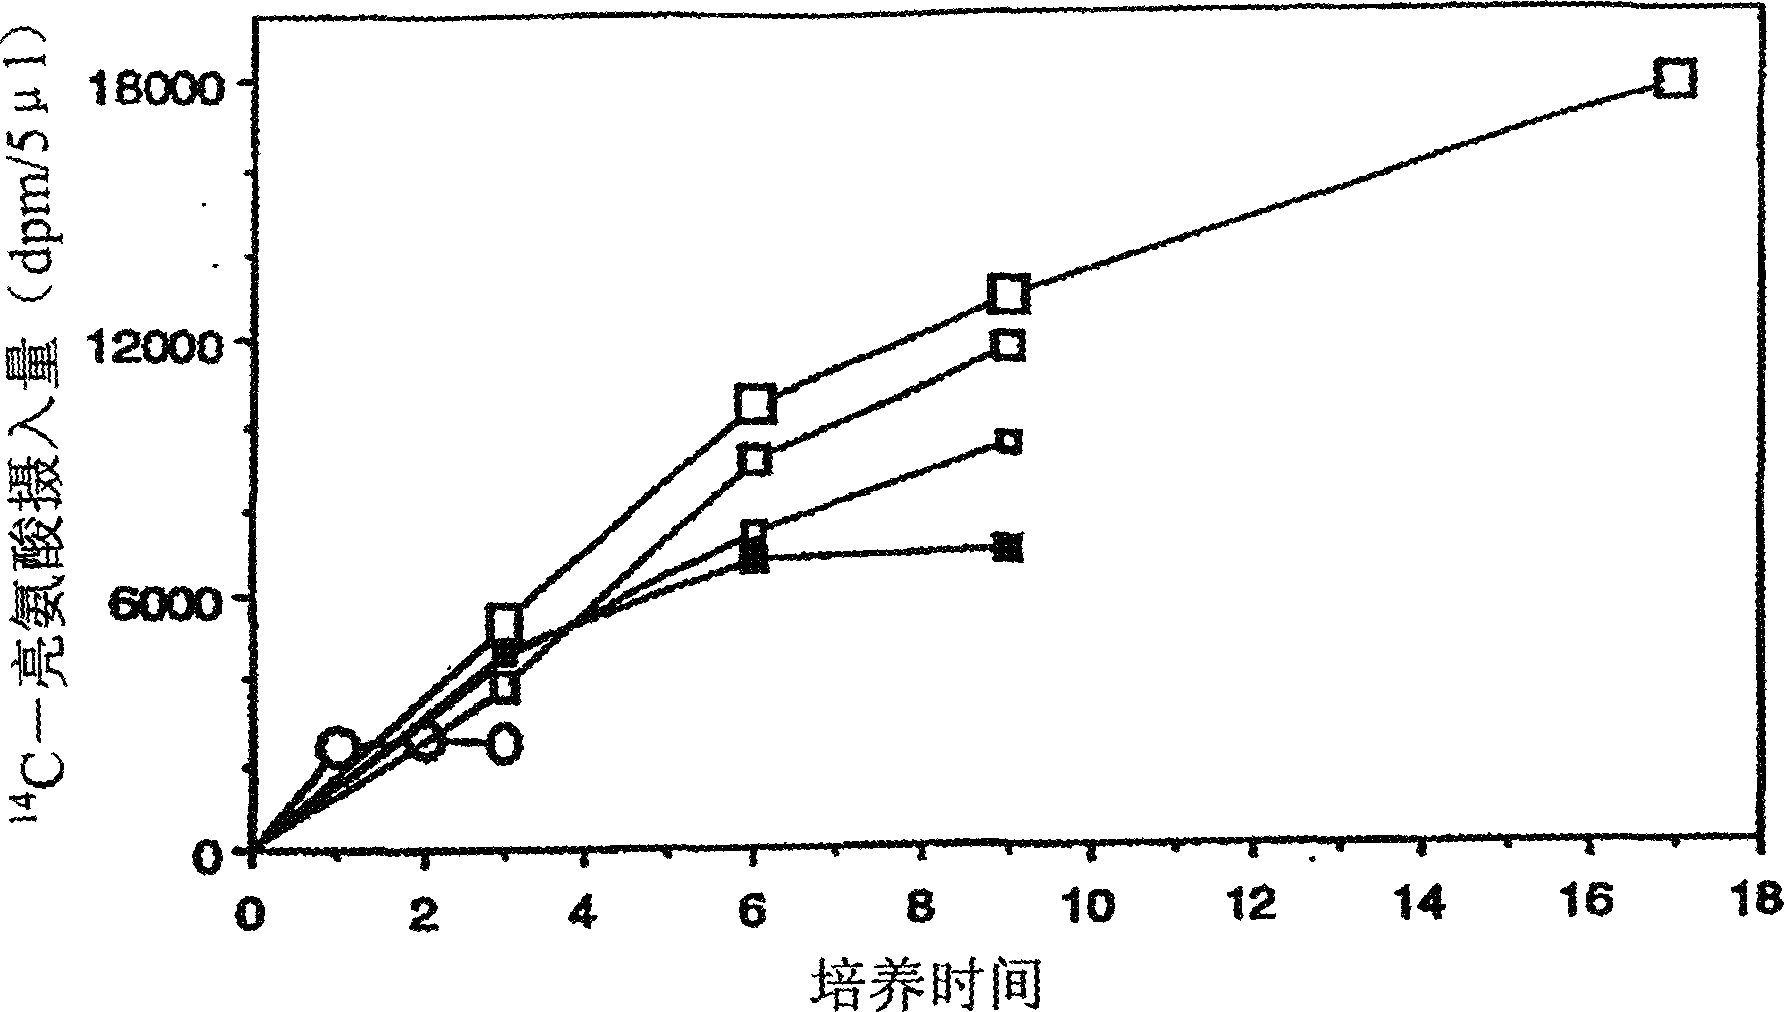 Methods of synthesizing cell-free protein